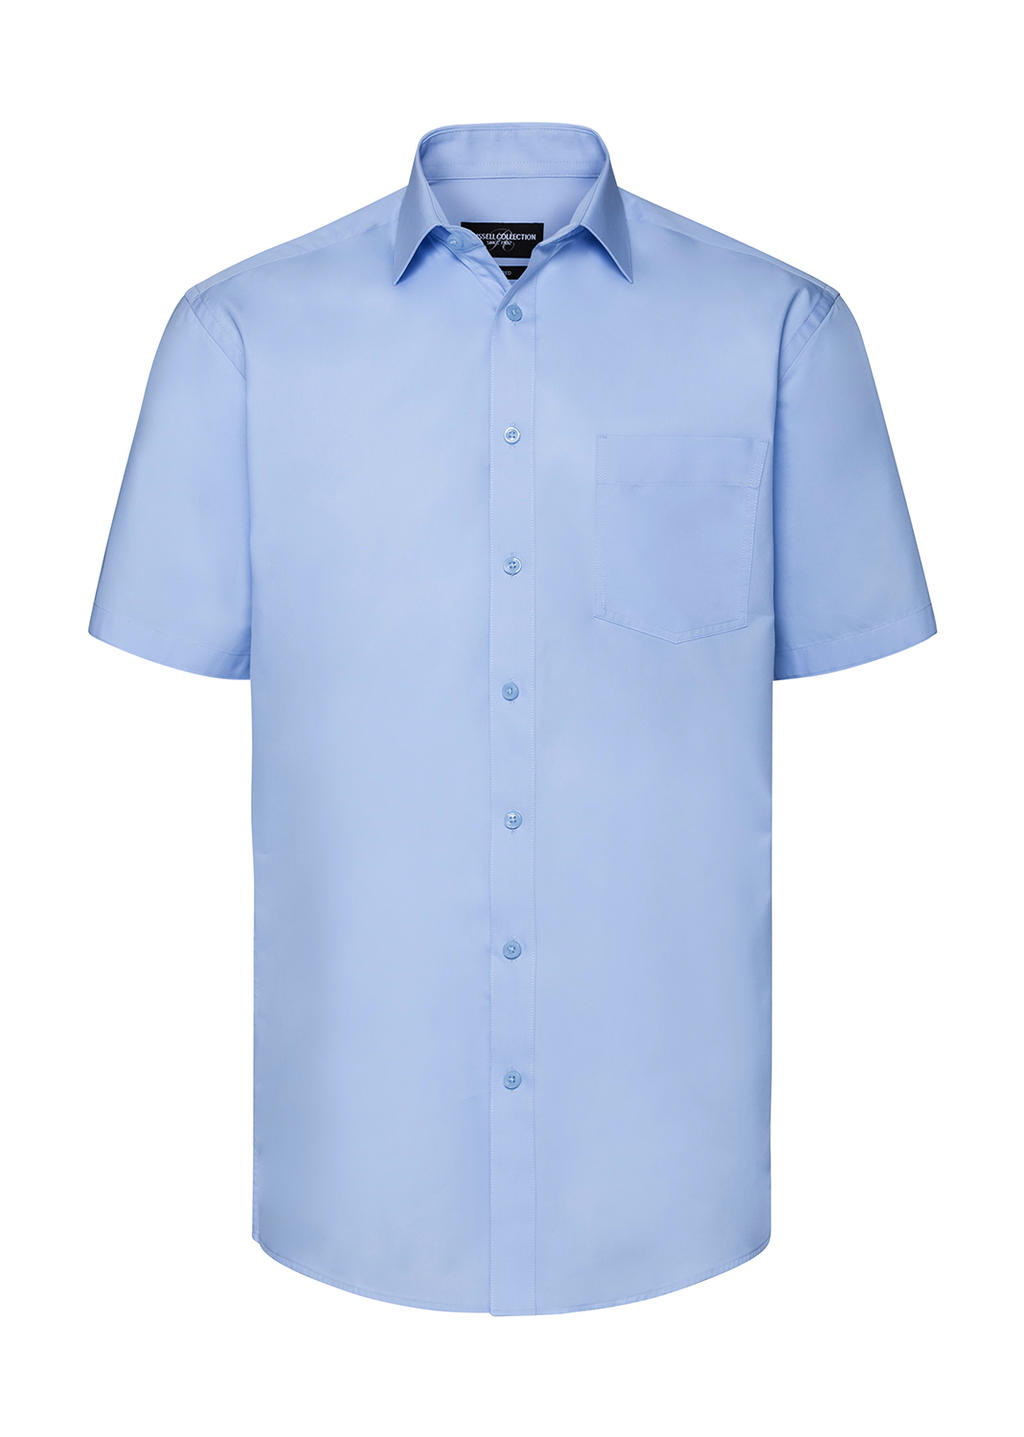  Mens Tailored Coolmax? Shirt in Farbe Light Blue